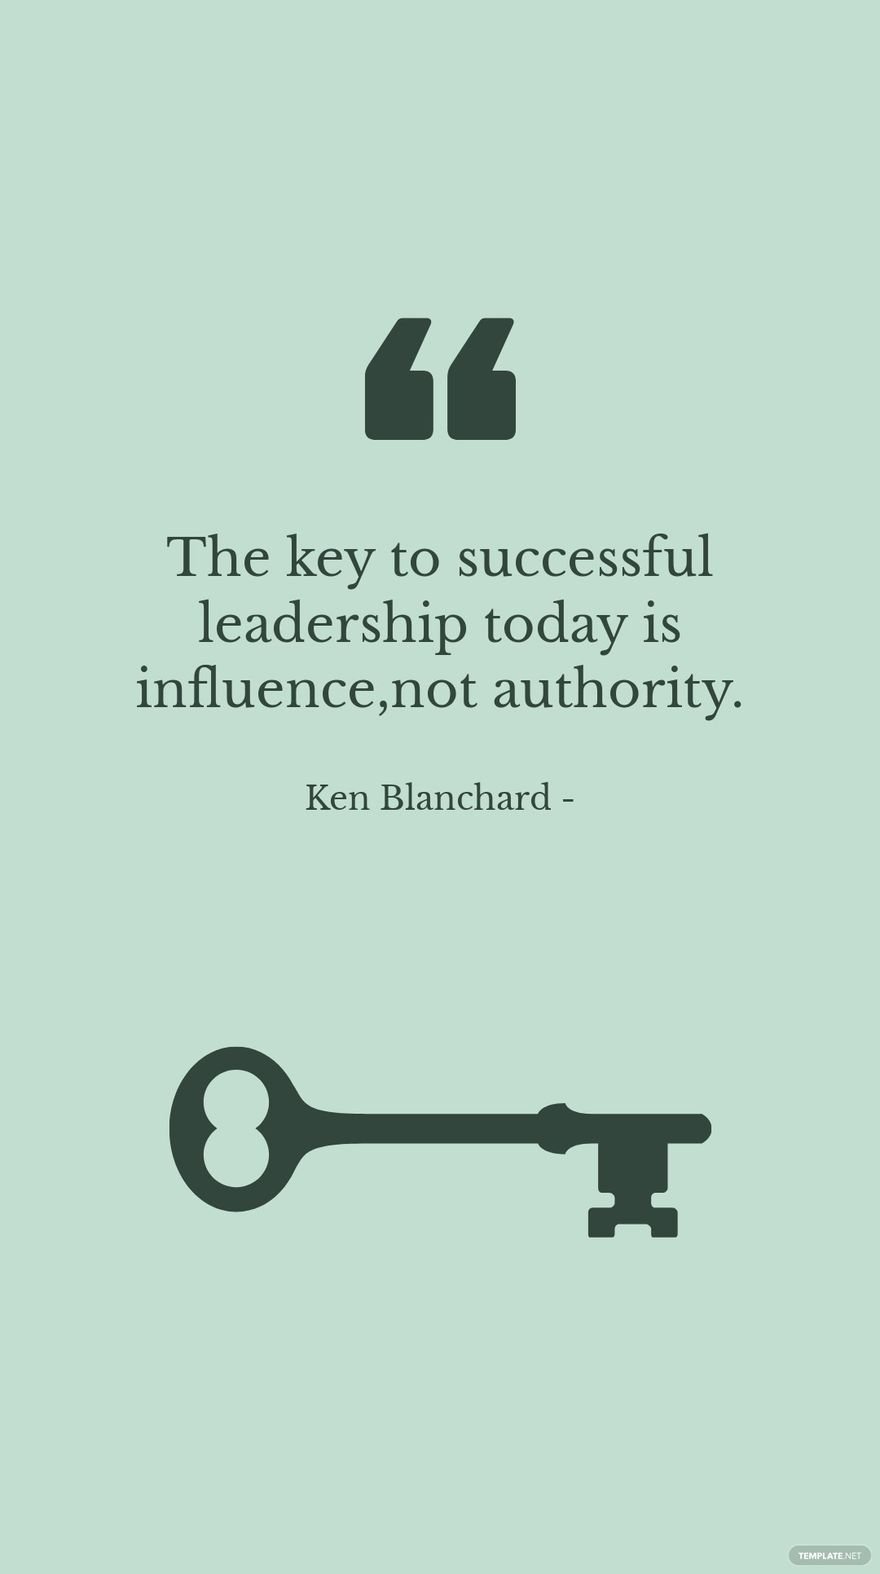 Free Ken Blanchard - The key to successful leadership today is influence, not authority.